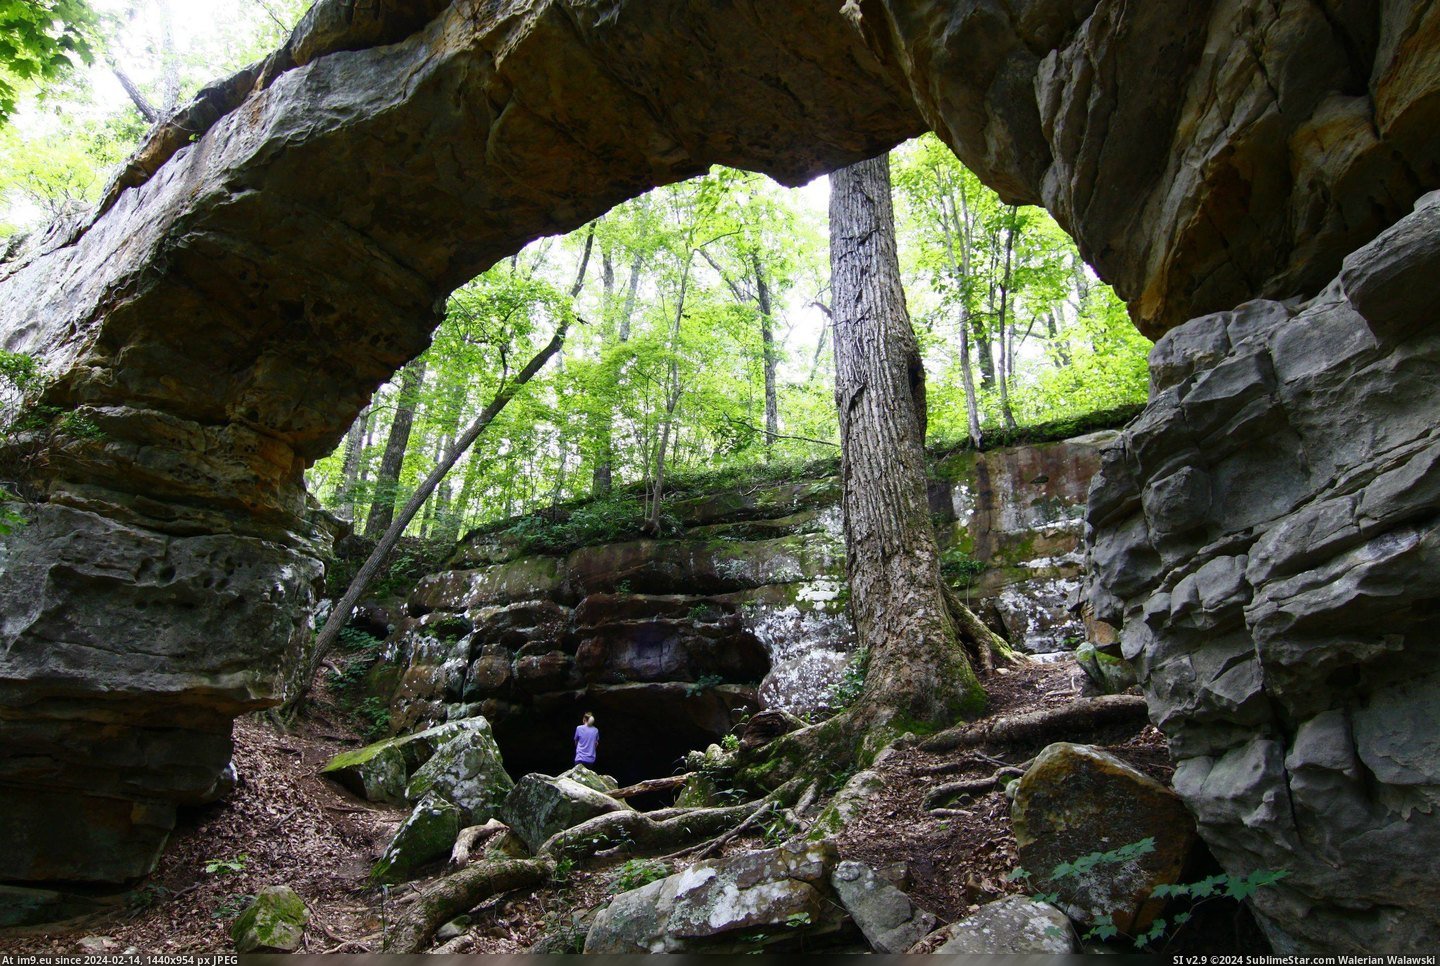 #Natural #Bridge #2851x1900 #Sewanee #Worry #Folks [Earthporn] Don't worry folks, Sewanee Natural Bridge here (TN) [2851x1900] Pic. (Image of album My r/EARTHPORN favs))